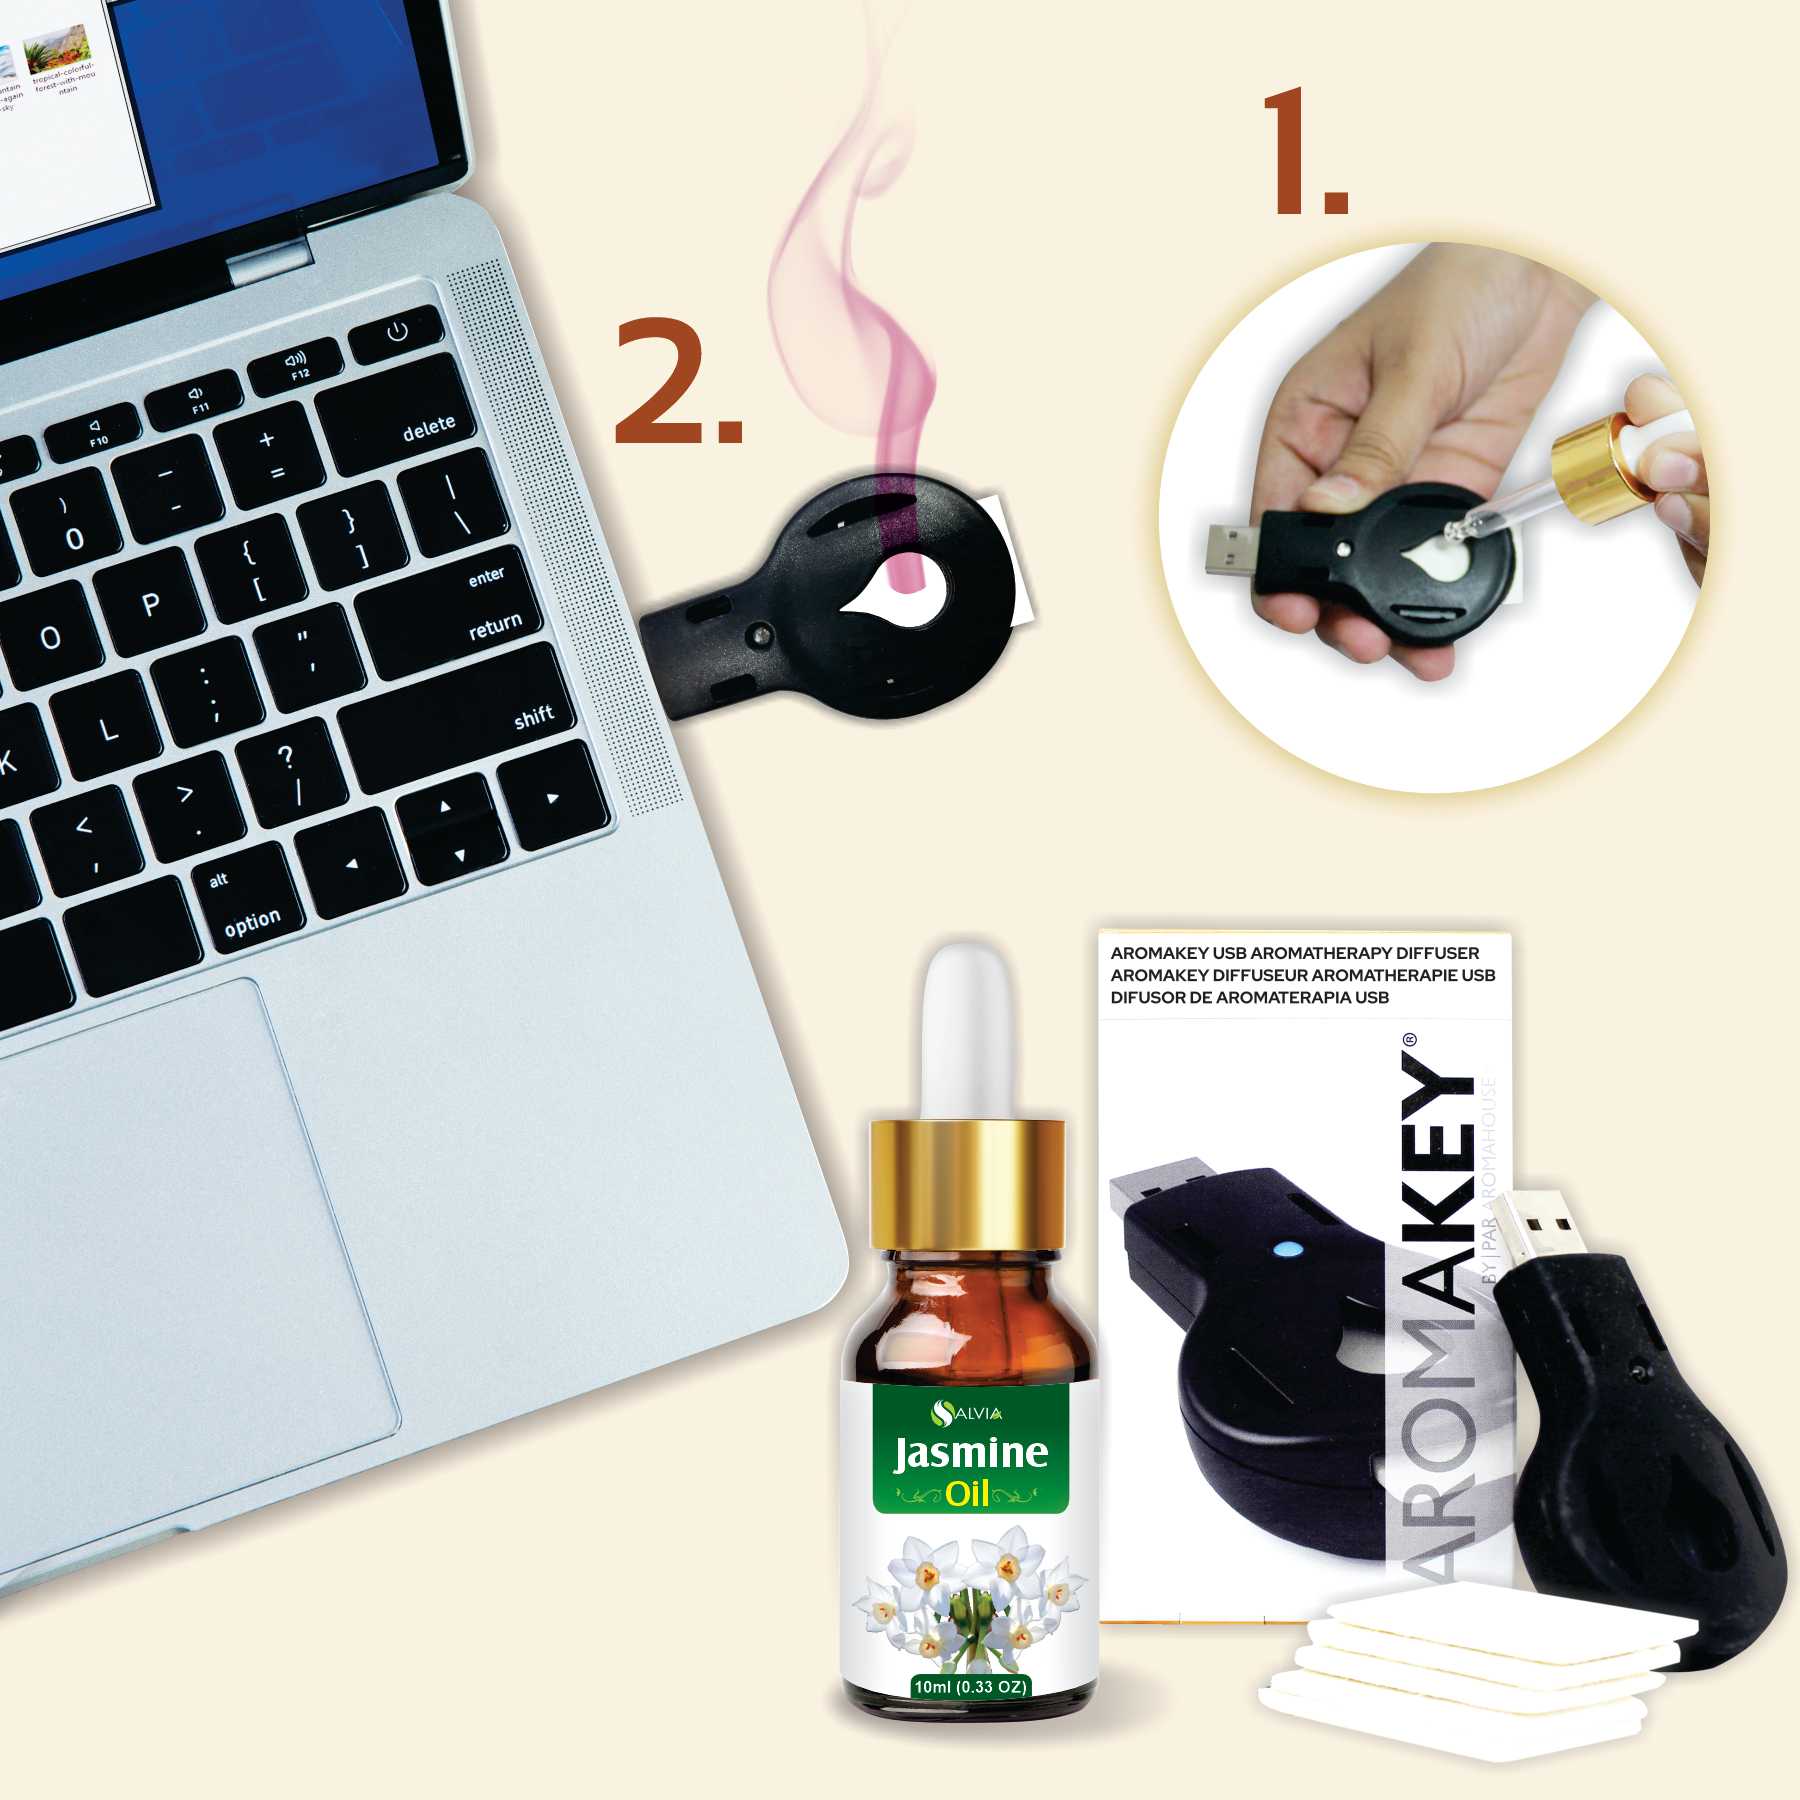 Salvia Gifts,USB Diffuser Combo Jasmine Oil with Laptop USB Key Diffuser